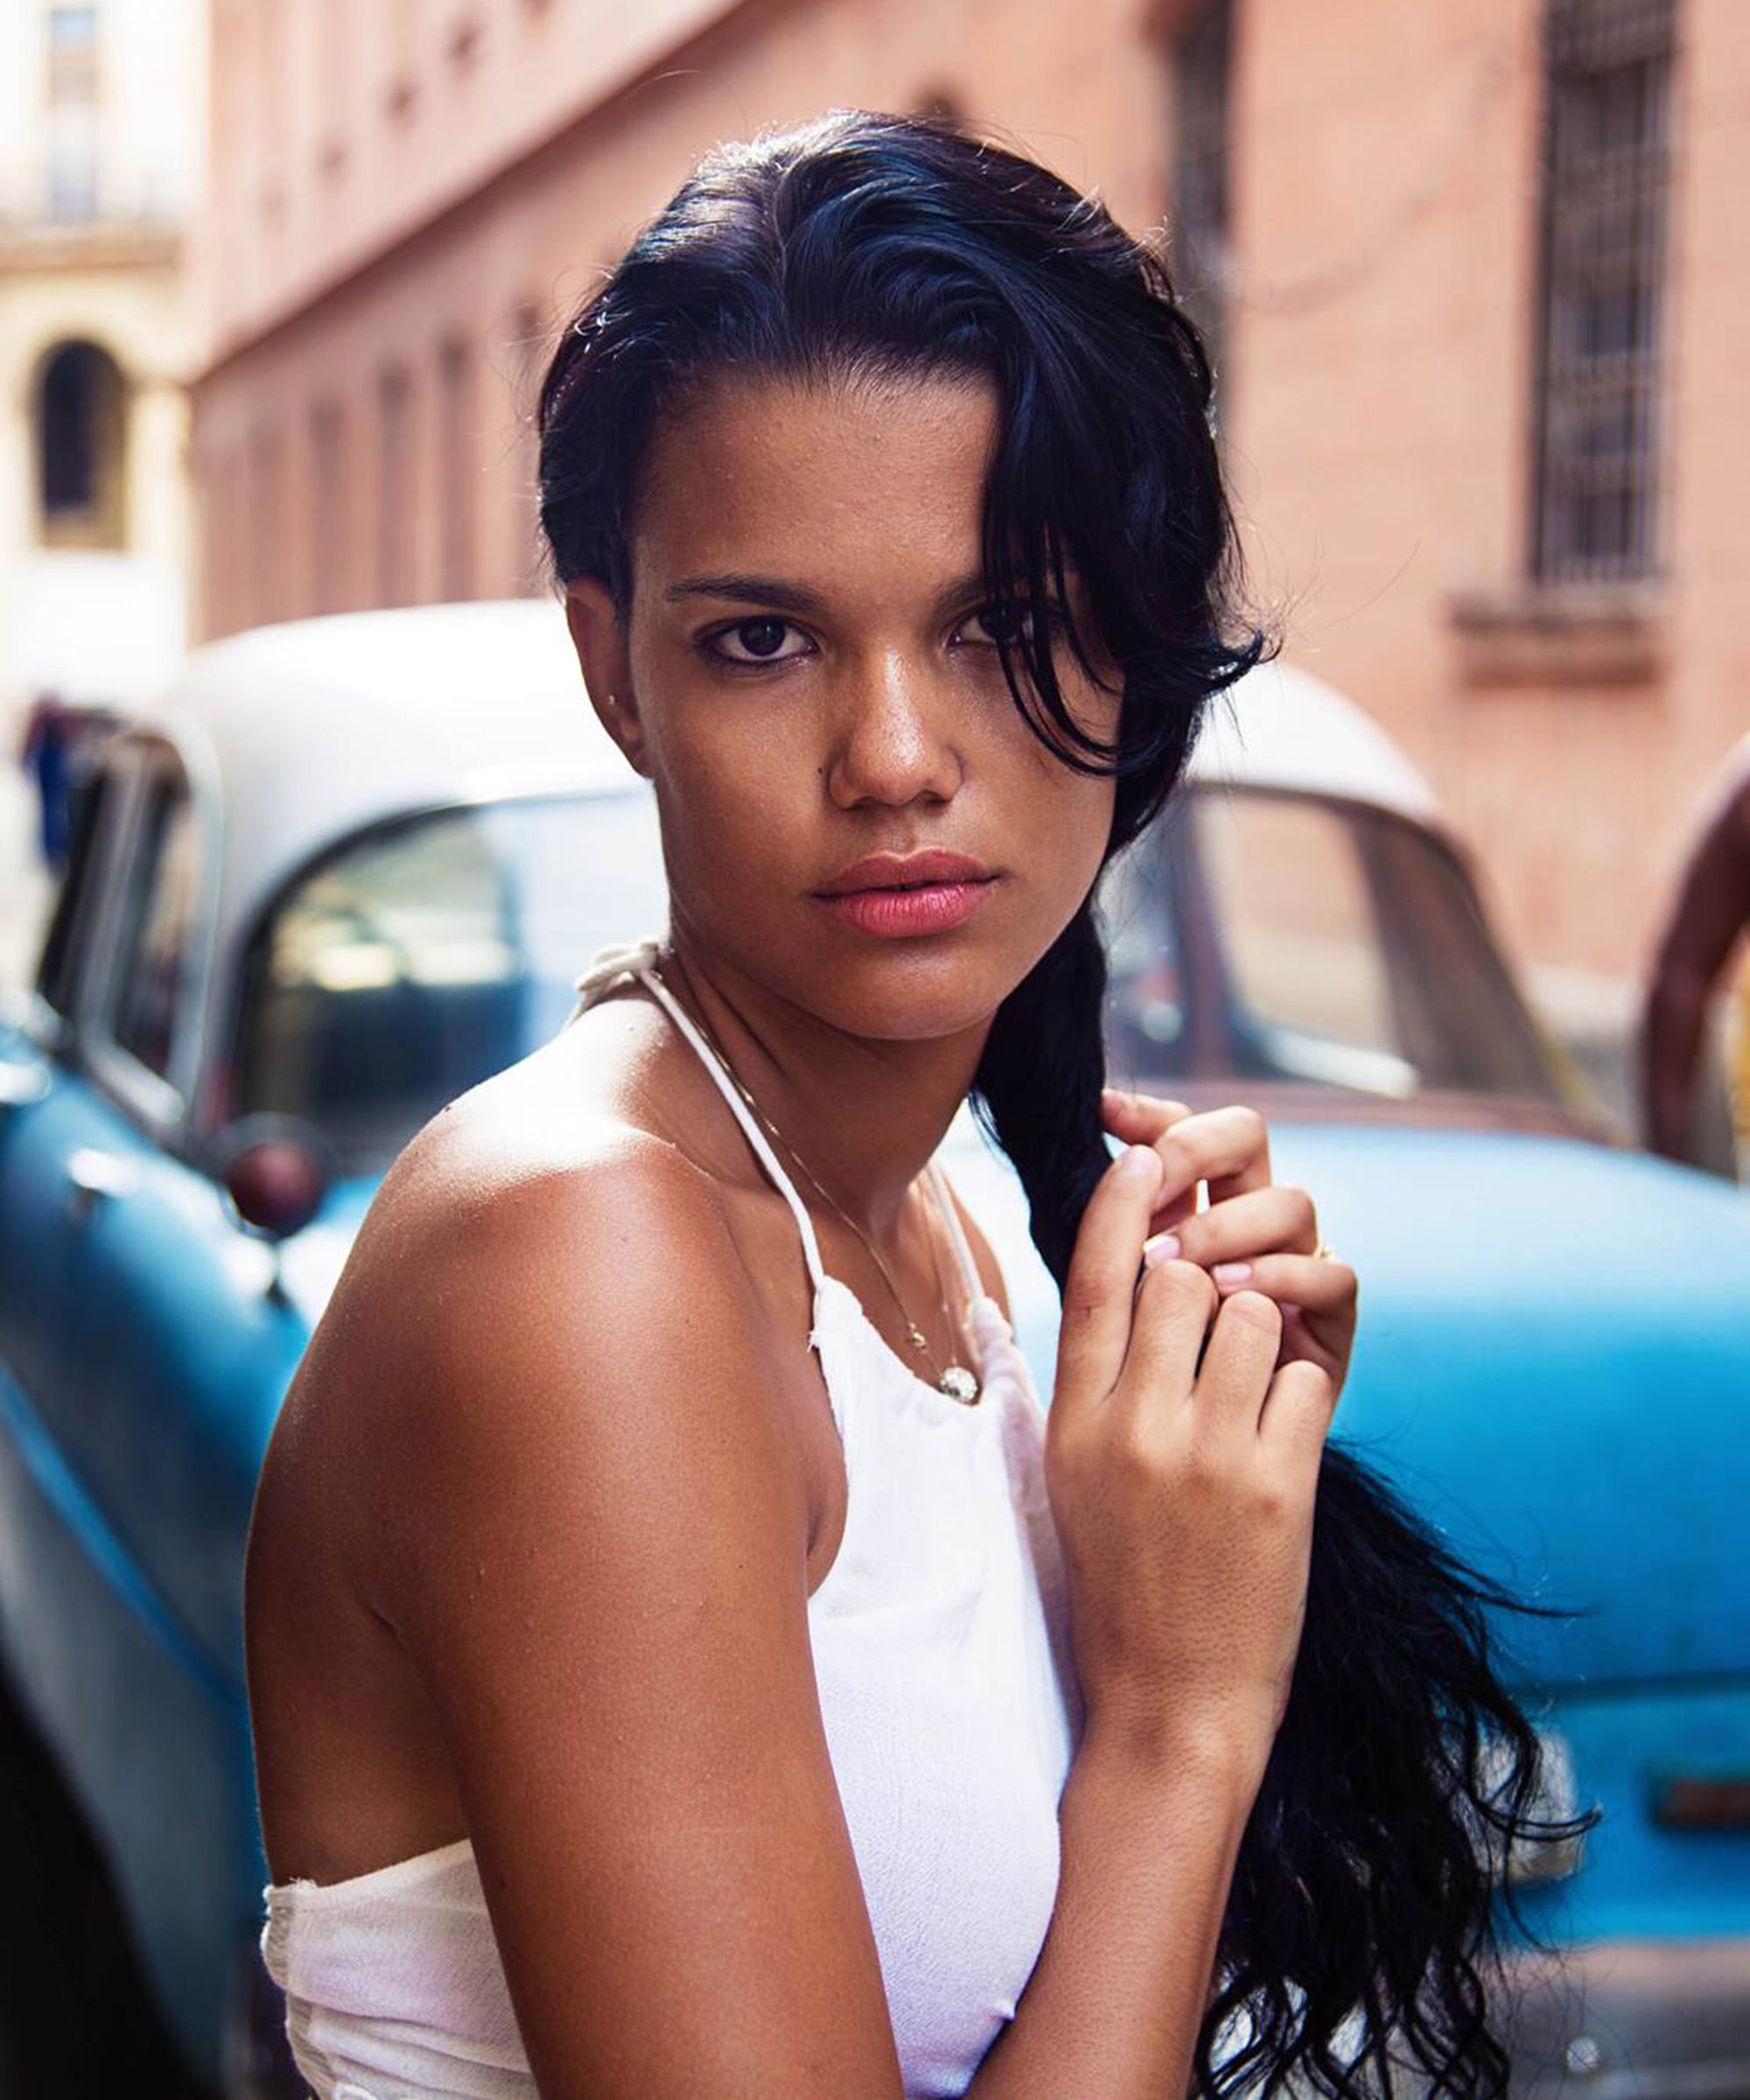 Dating Cuban Women A Guide To Making The Most Of Love